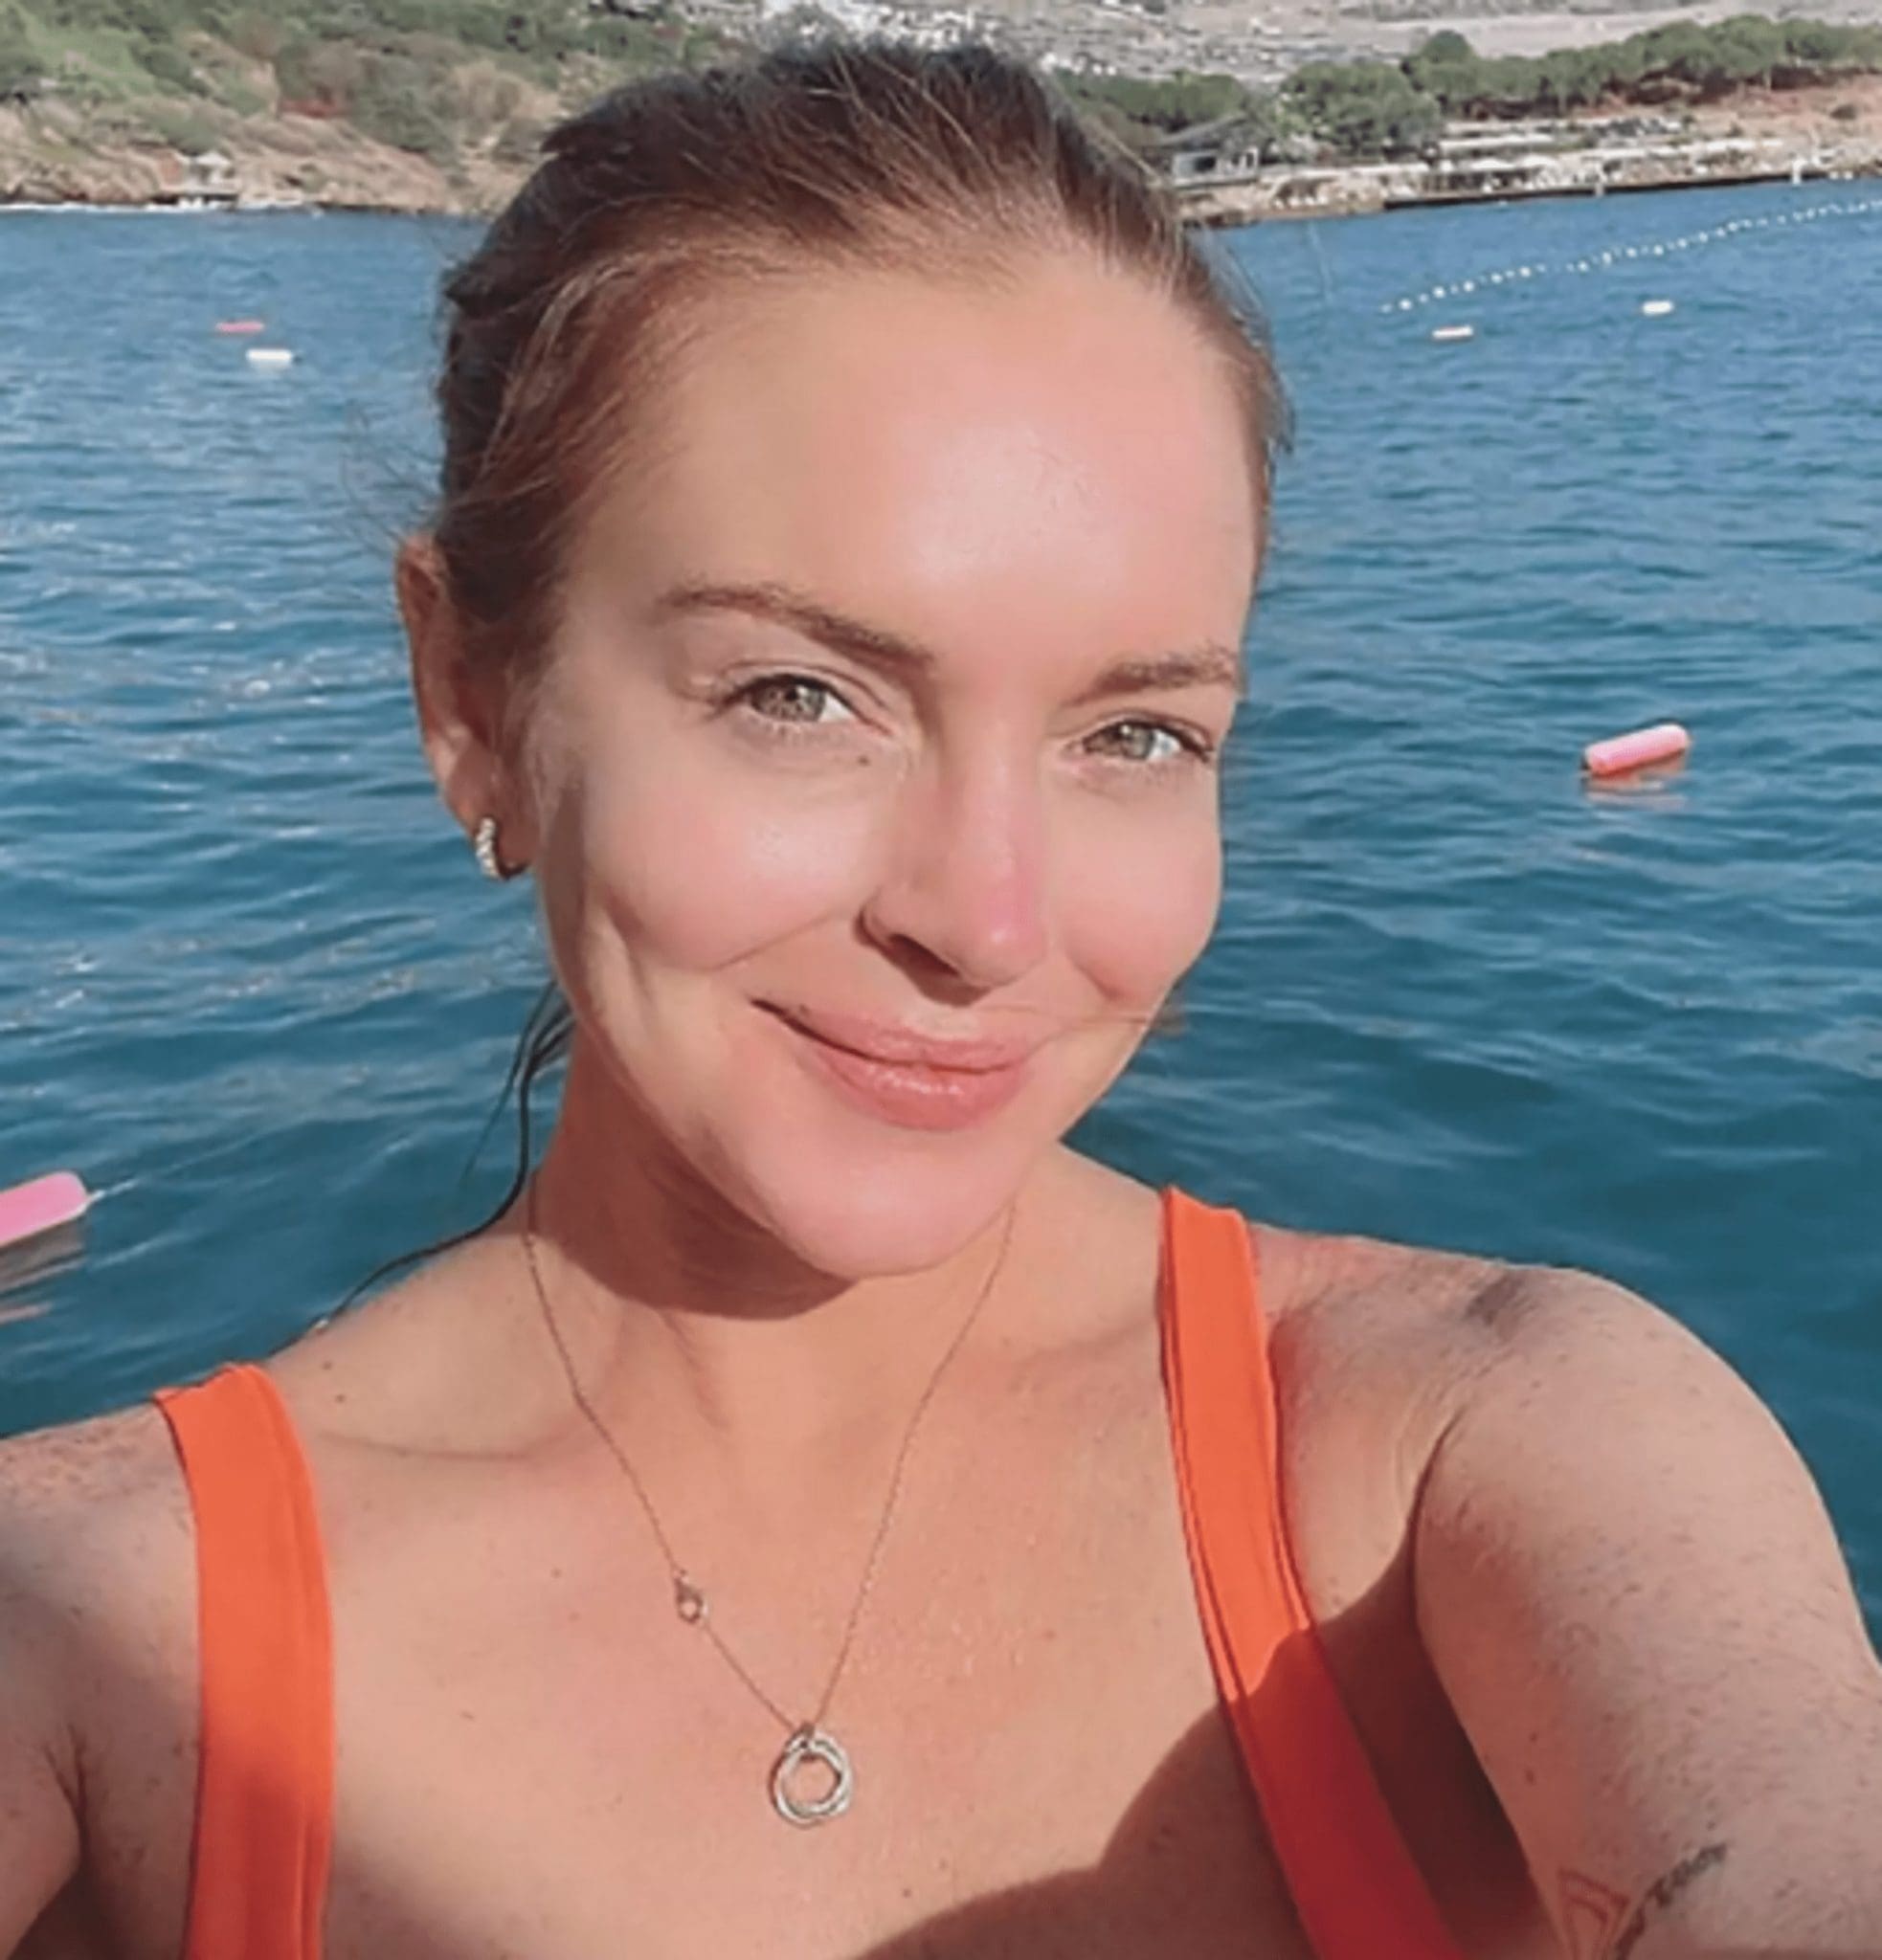 Lindsay Lohan posted a photo from the Turkish resort